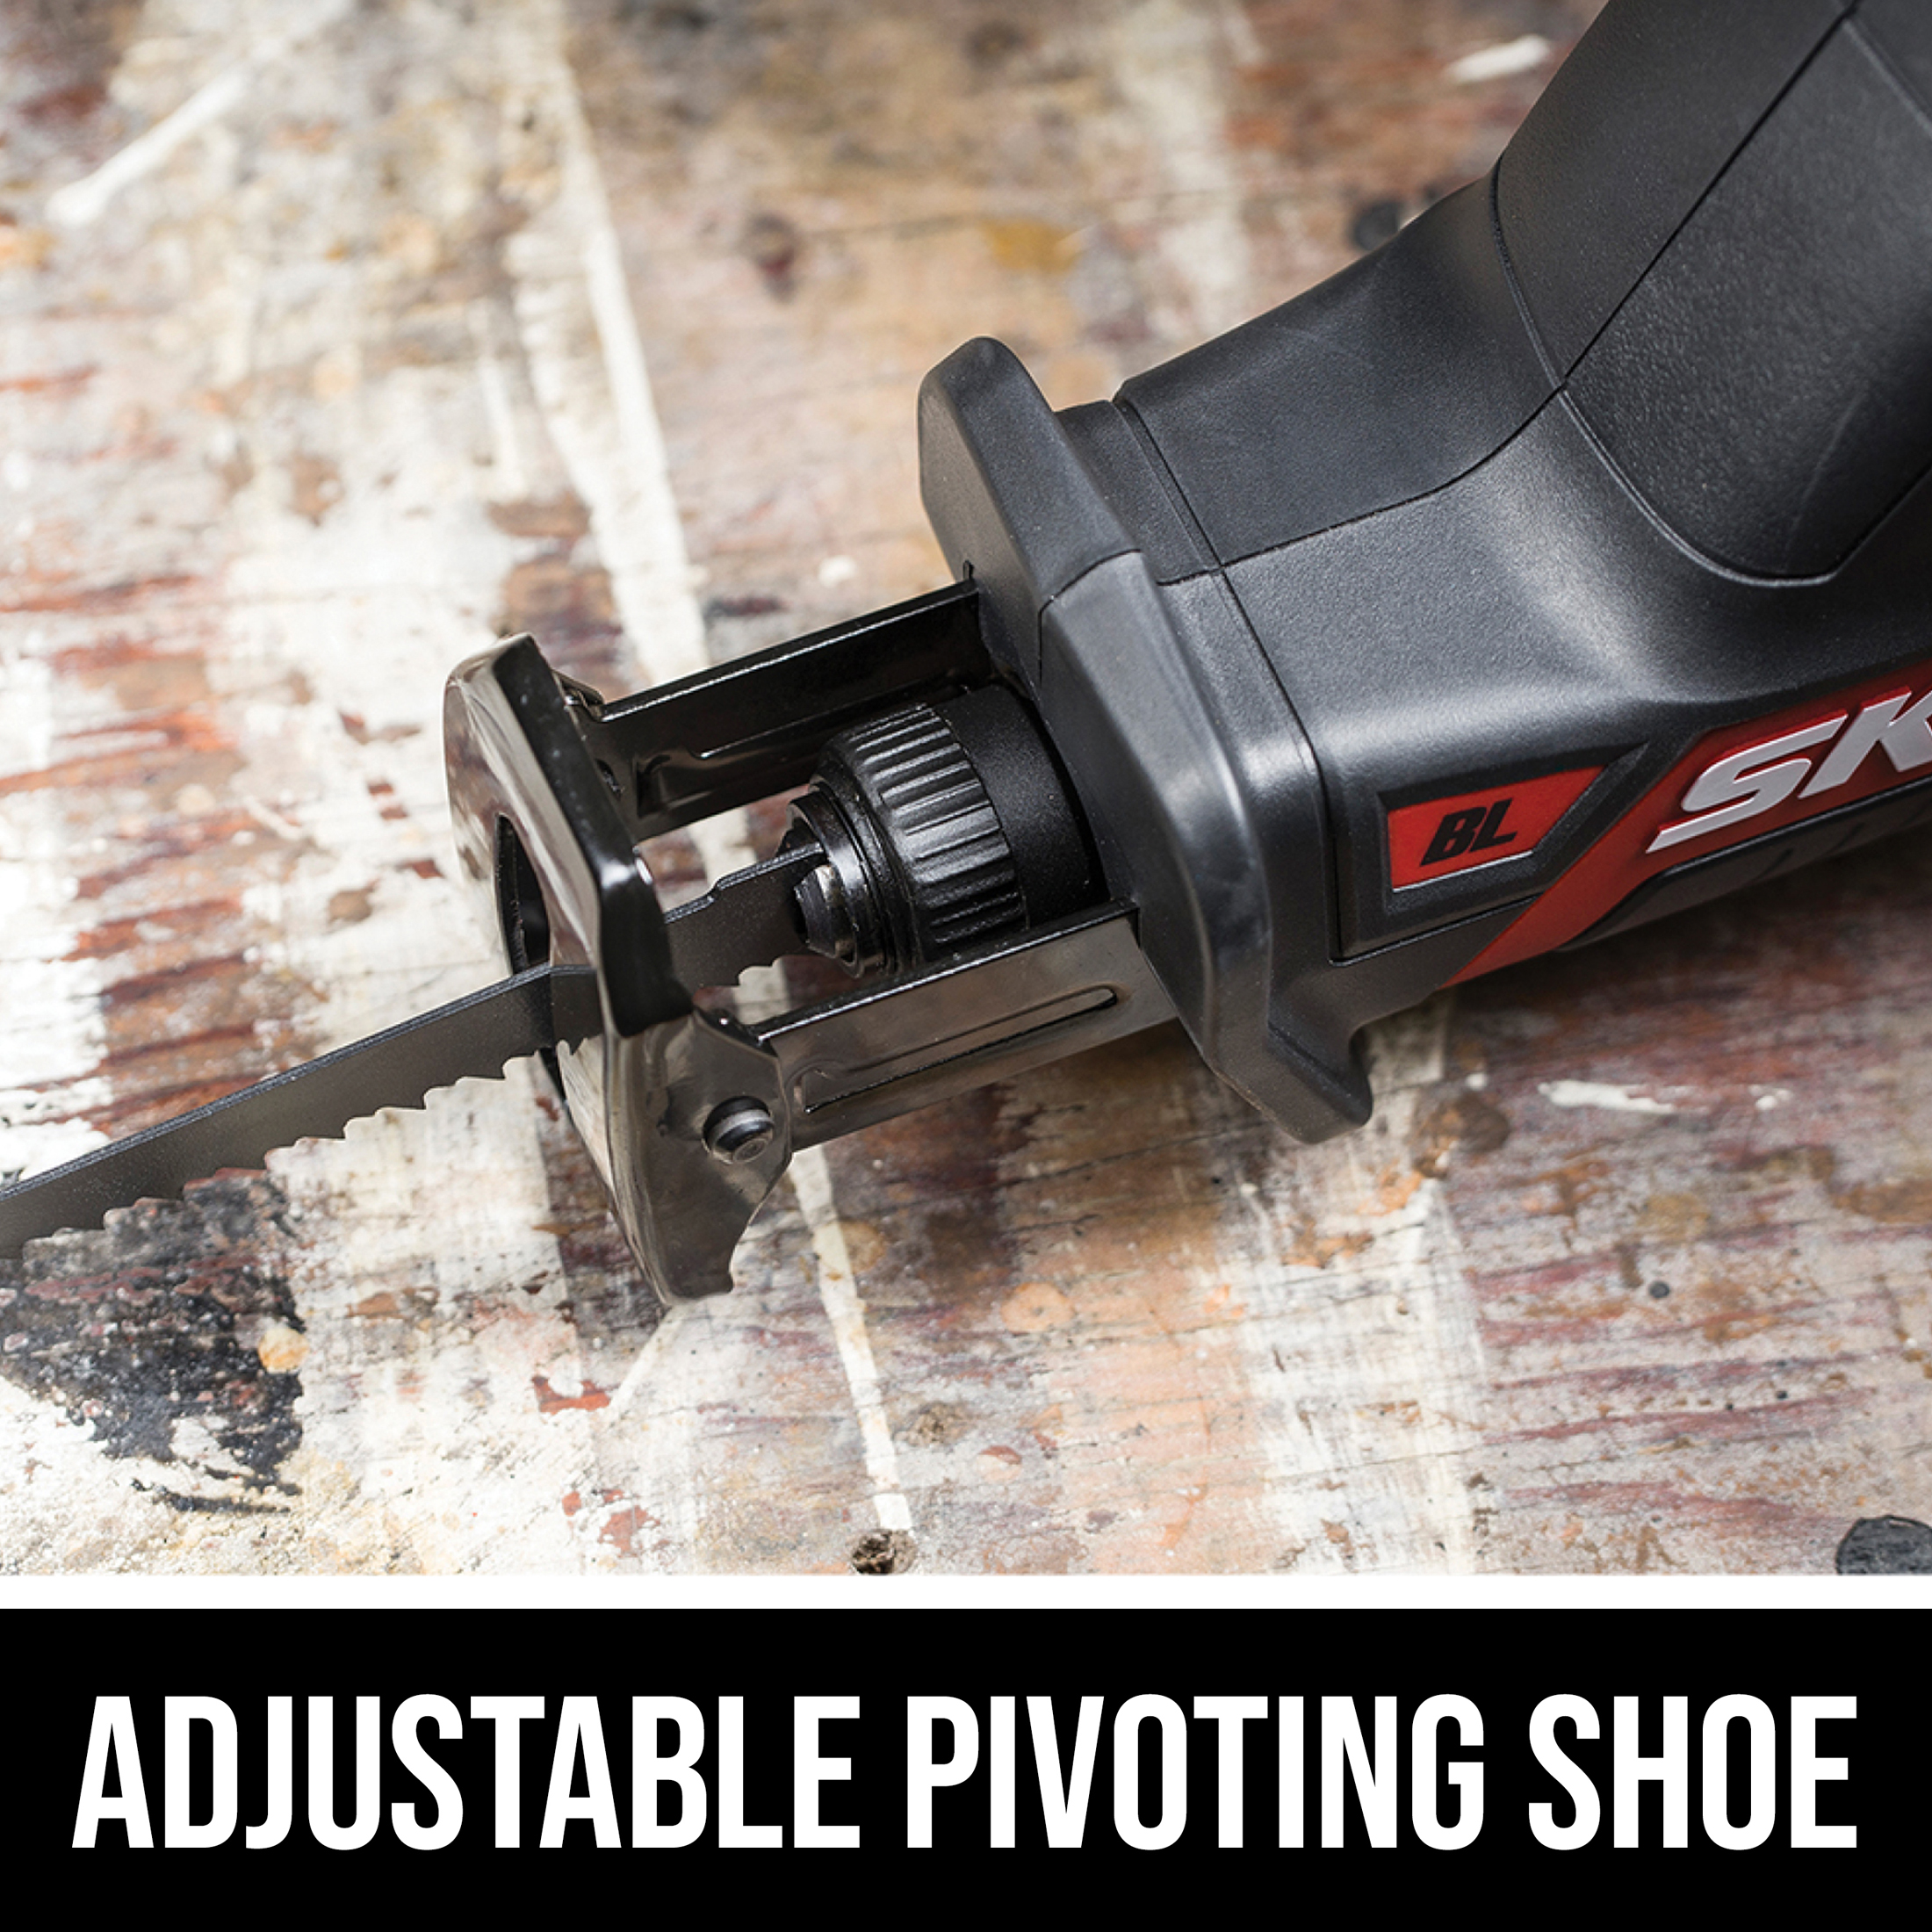 SKIL PWR Core 12™ Brushless 12V Cordless 4-Tool Kit: Drill, Circular Saw, Recip  Saw, and LED light